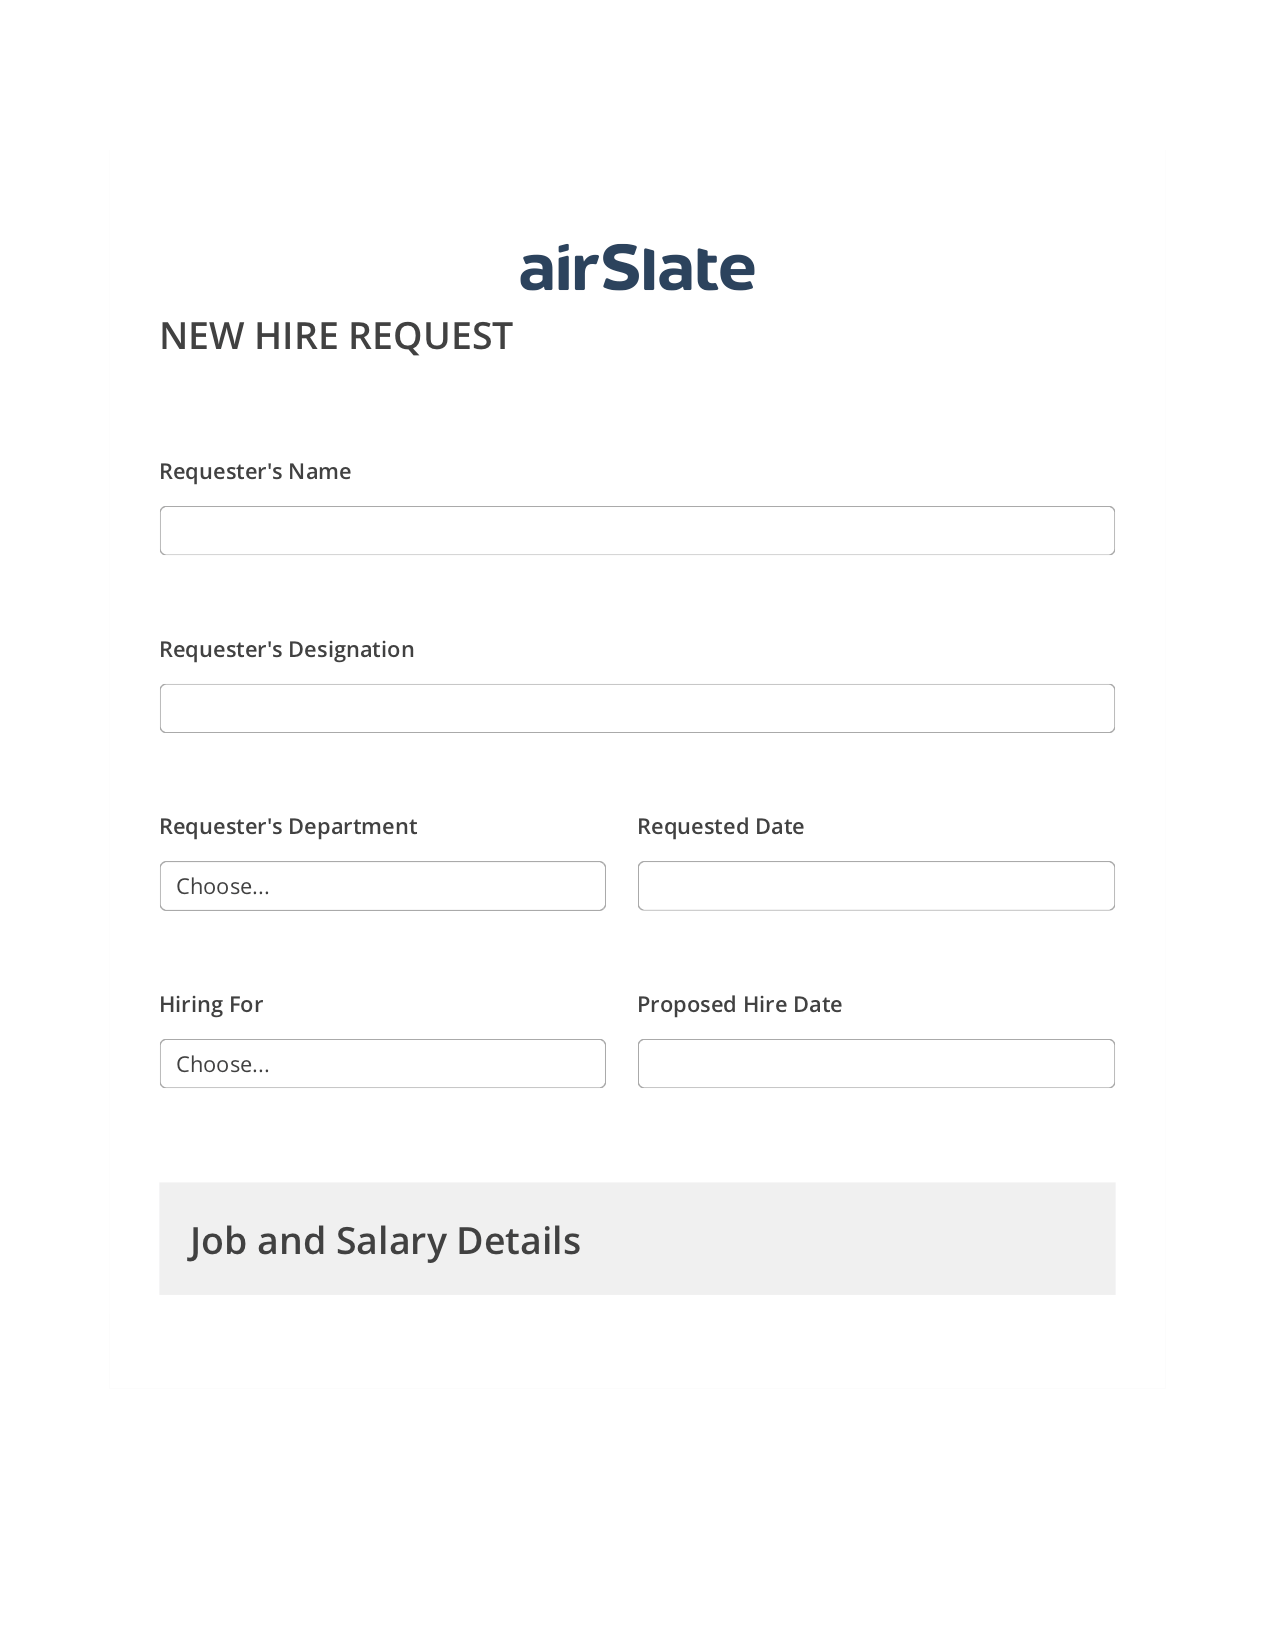 Multirole Hiring Request Workflow Pre-fill from MS Dynamics 365 Records, Send a Slate with Roles Bot, Export to Smartsheet